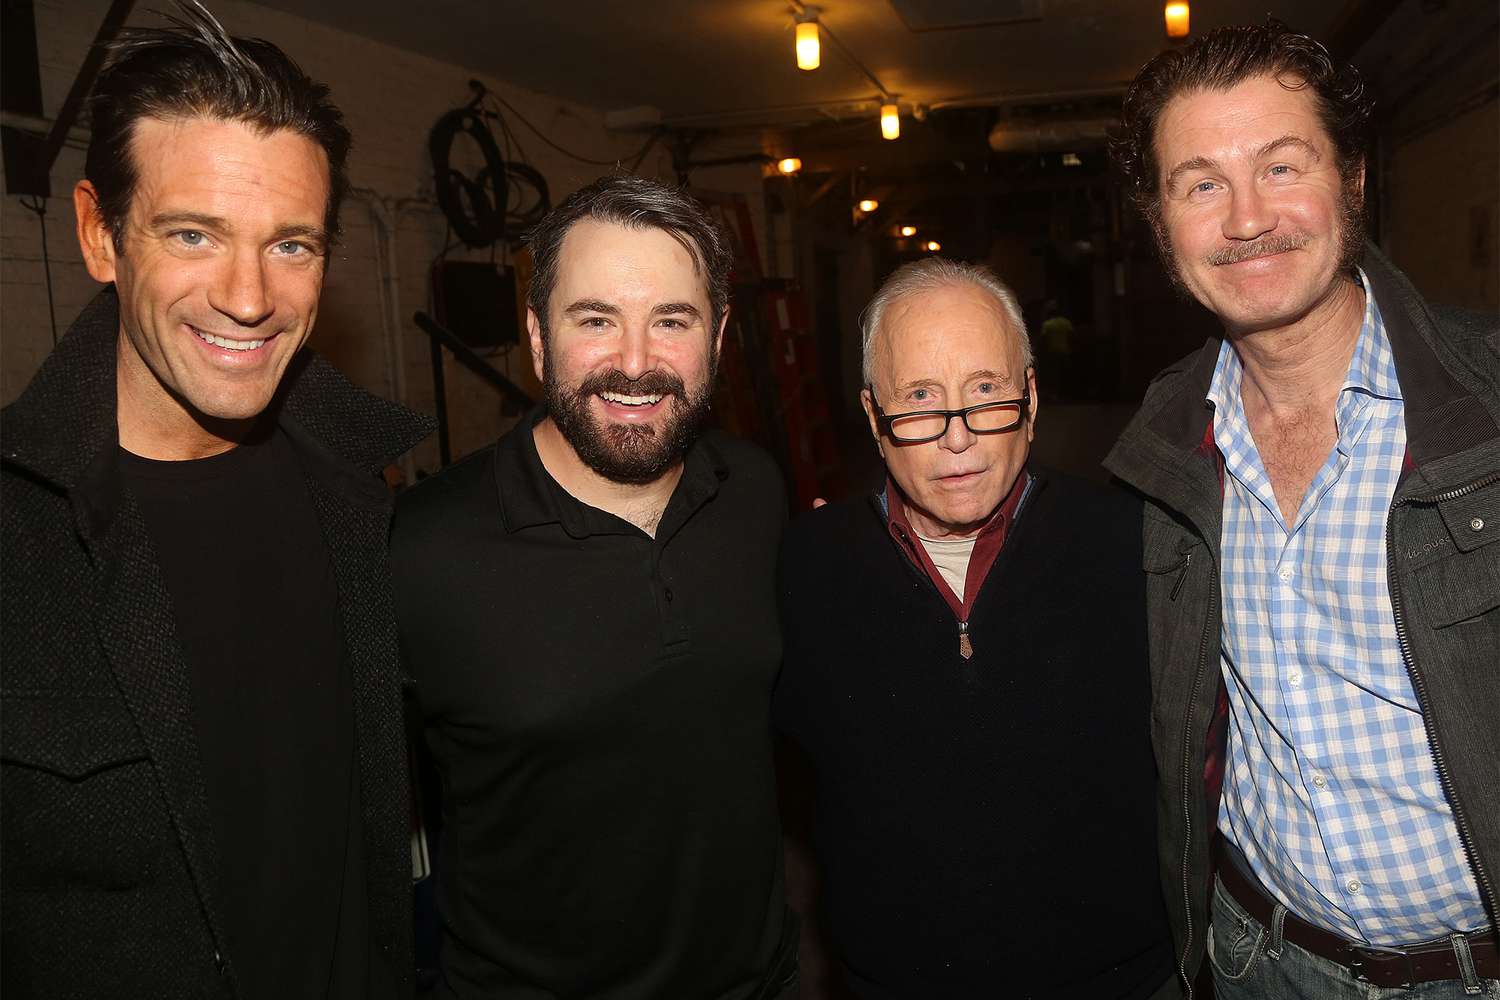 Colin Donnell, Alex Brightman, Richard Dreyfuss and Ian Shaw pose backstage at the new play "The Shark is Broken" on Broadway at The Golden Theater on October 18, 2023 in New York City.